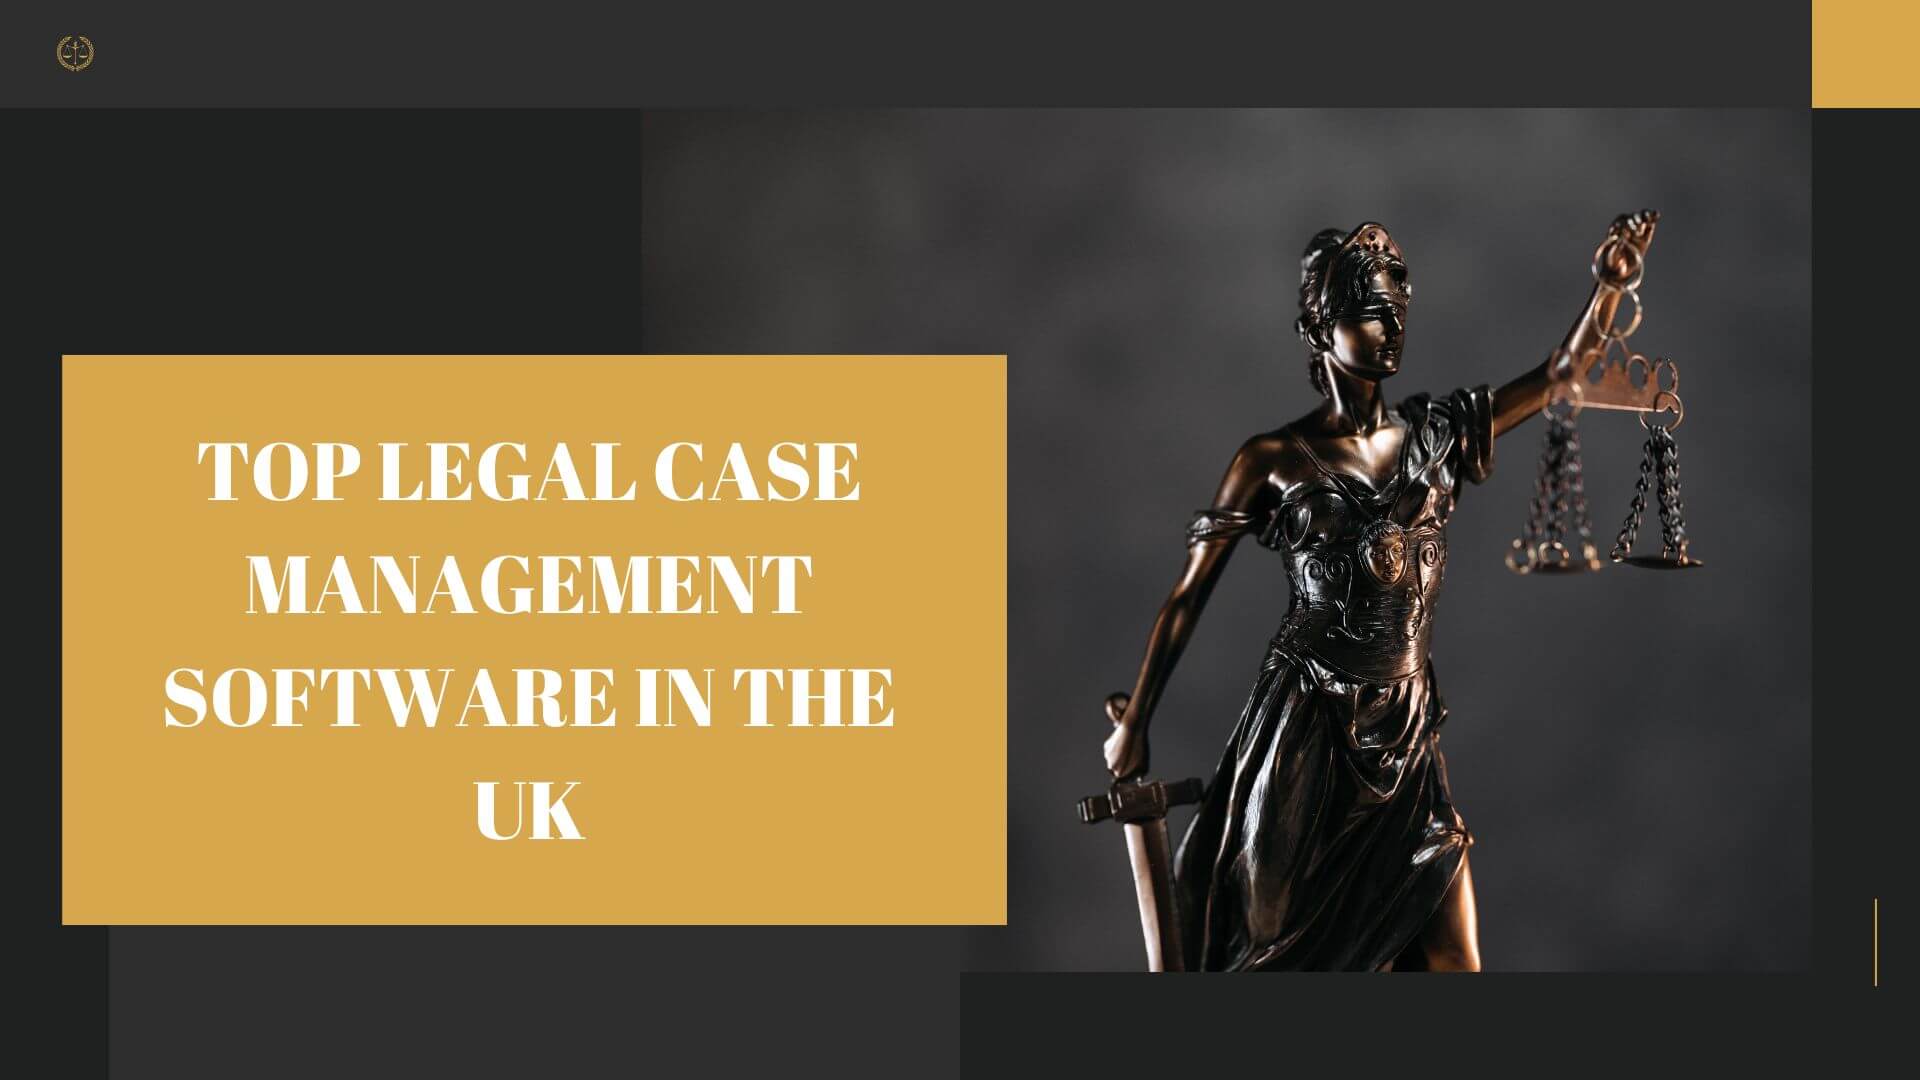 Top Legal Case Management Software in the UK